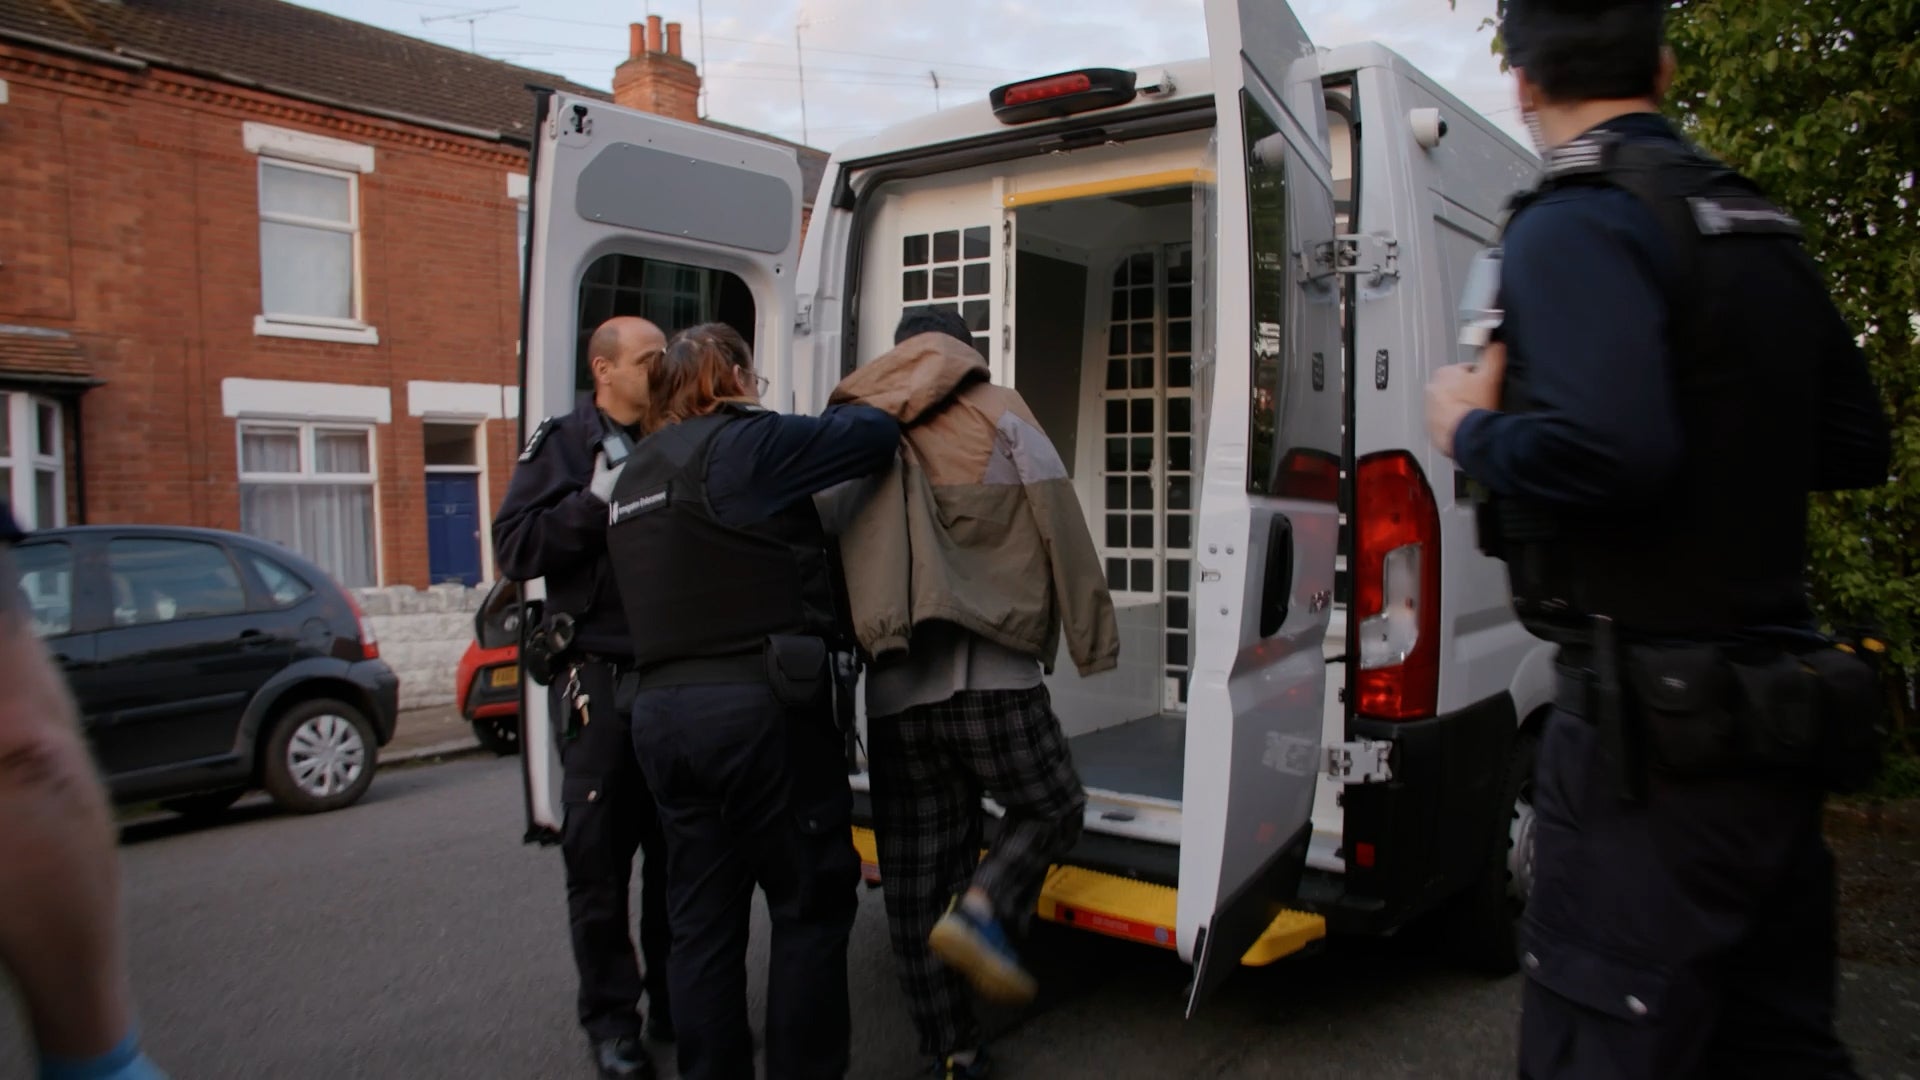 The Refugee Council said the detentions were causing ‘fear، distress and great anxiety’